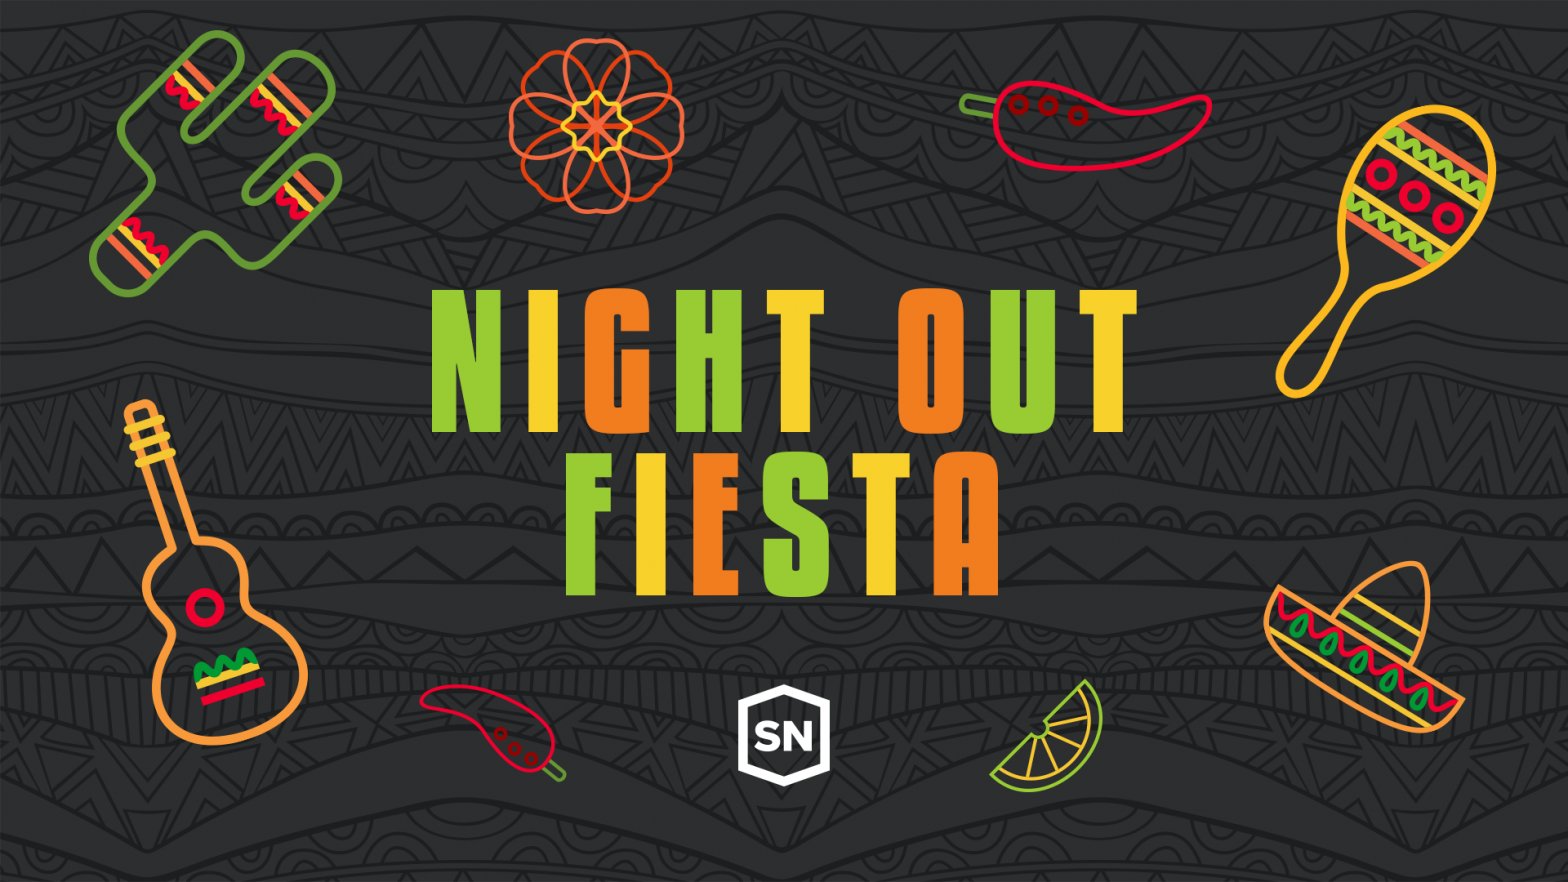 Night Out Fiesta image